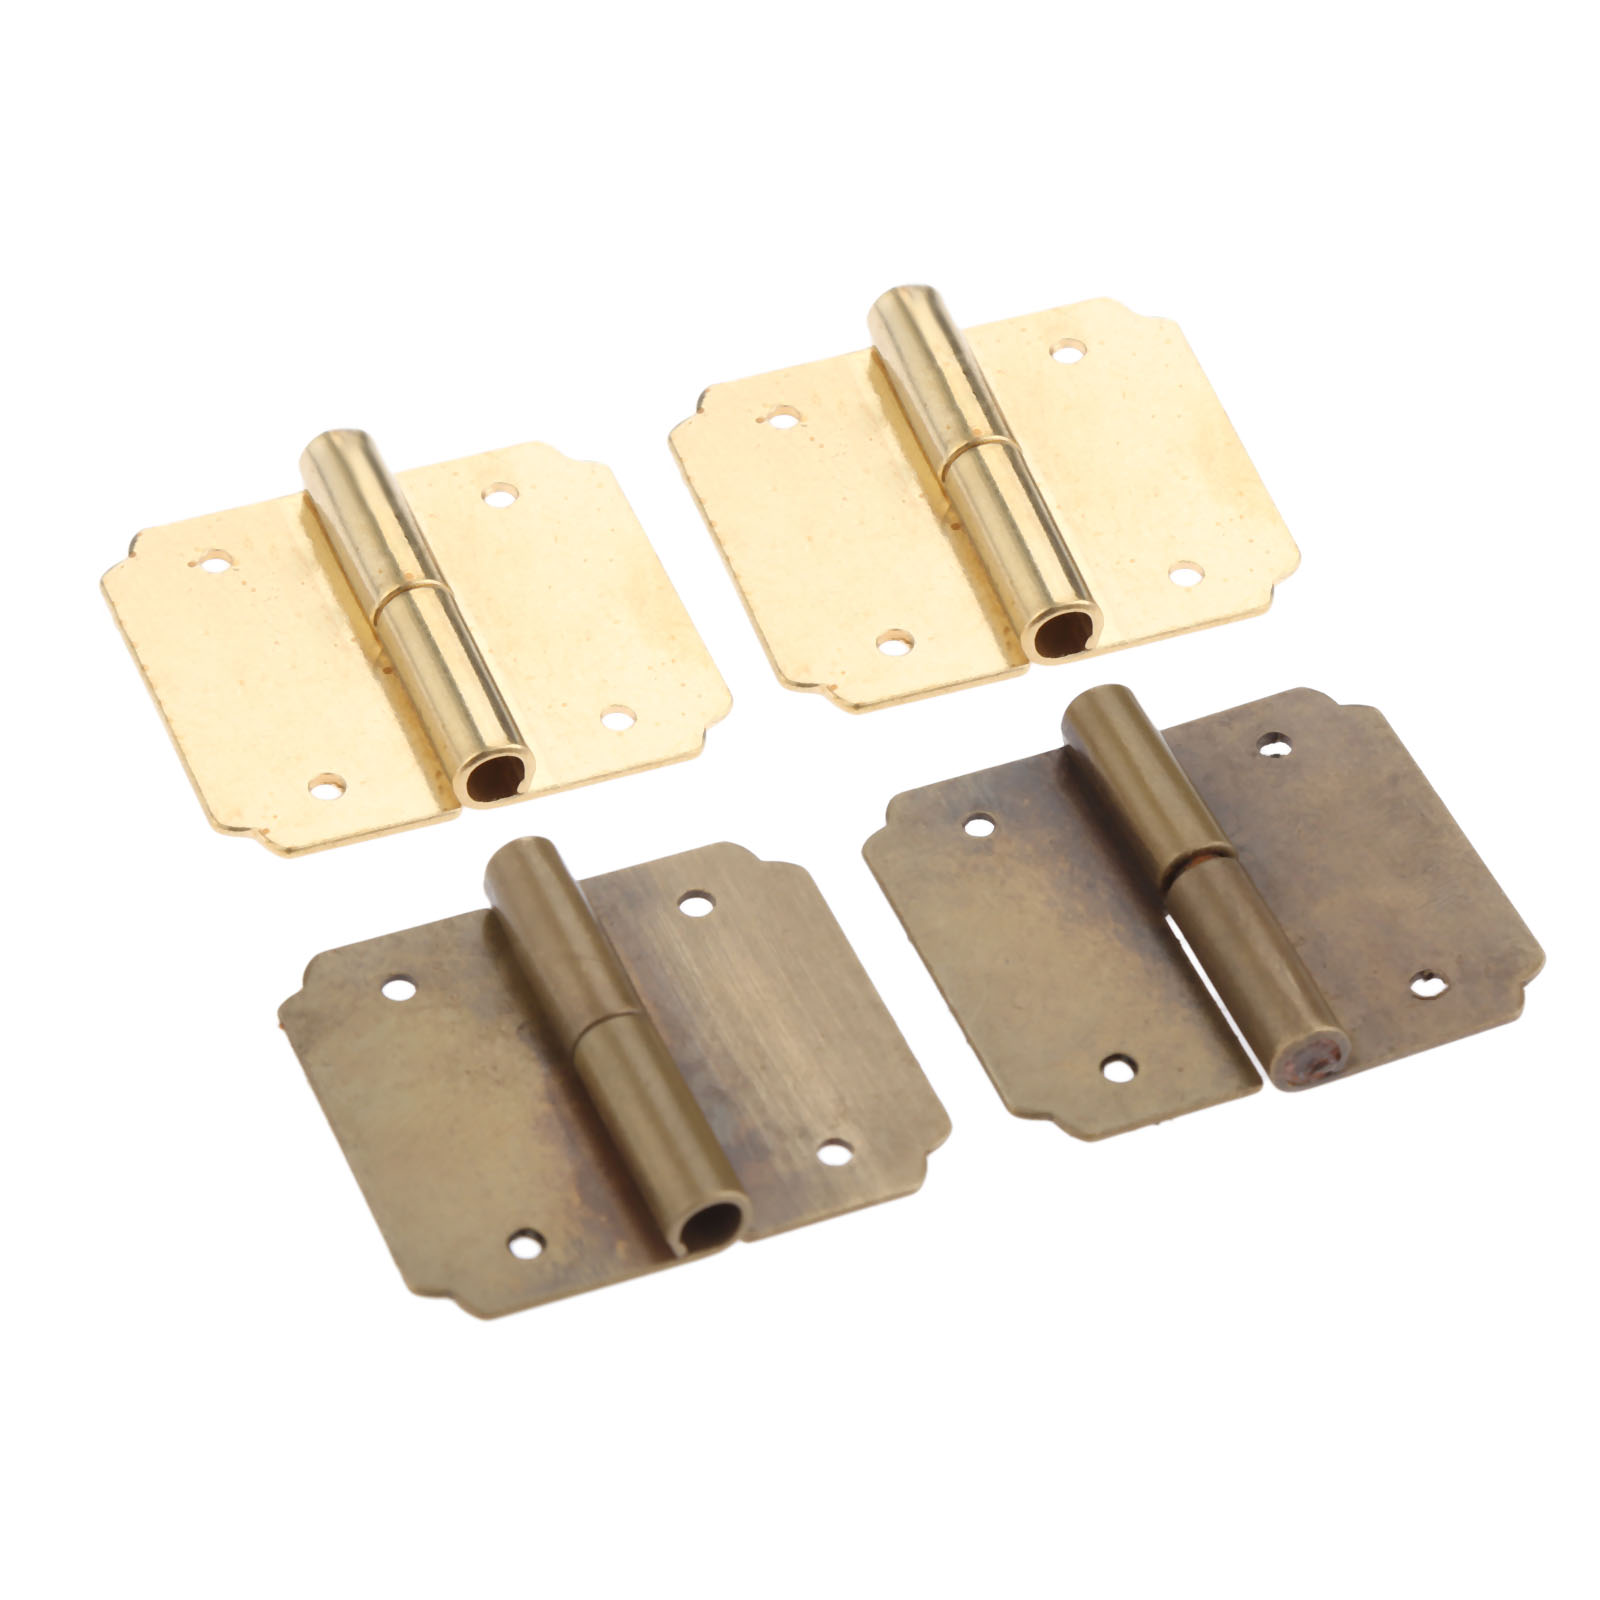 DRELD 2Pcs 33*29mm Brass Furniture Hinges Cabinet Drawer Door Hinge Antique Bronze Decorative Hinges Fittings For Jewelry Box